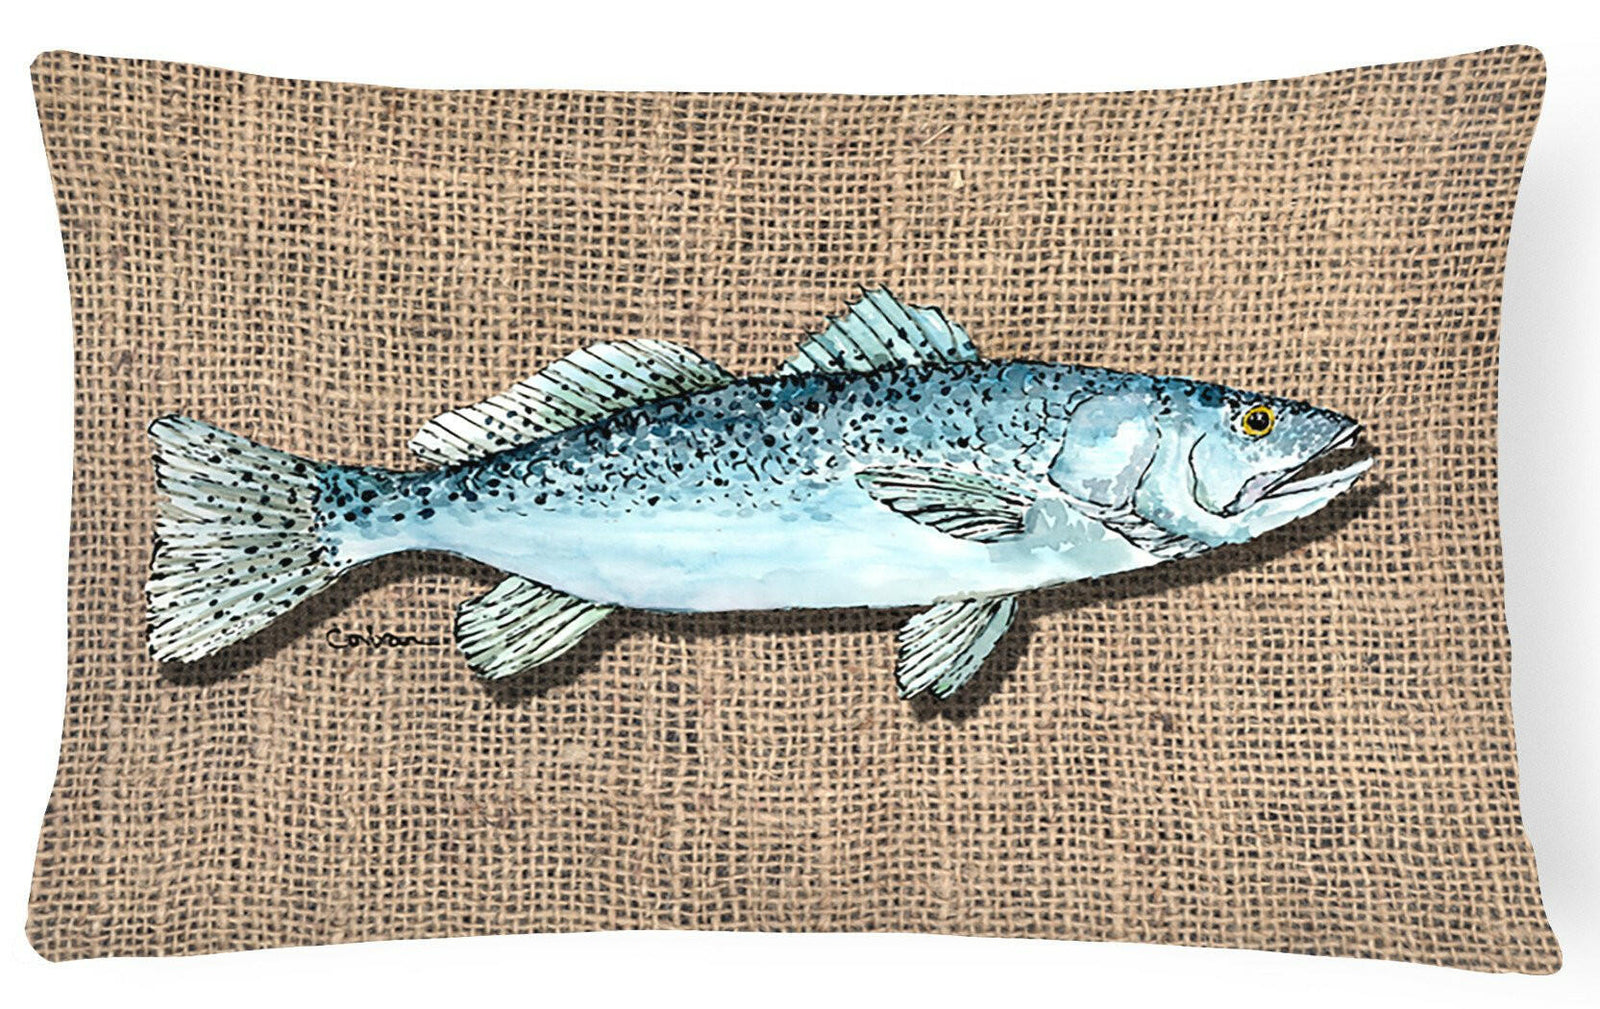 Fish Speckled Trout   Canvas Fabric Decorative Pillow by Caroline's Treasures